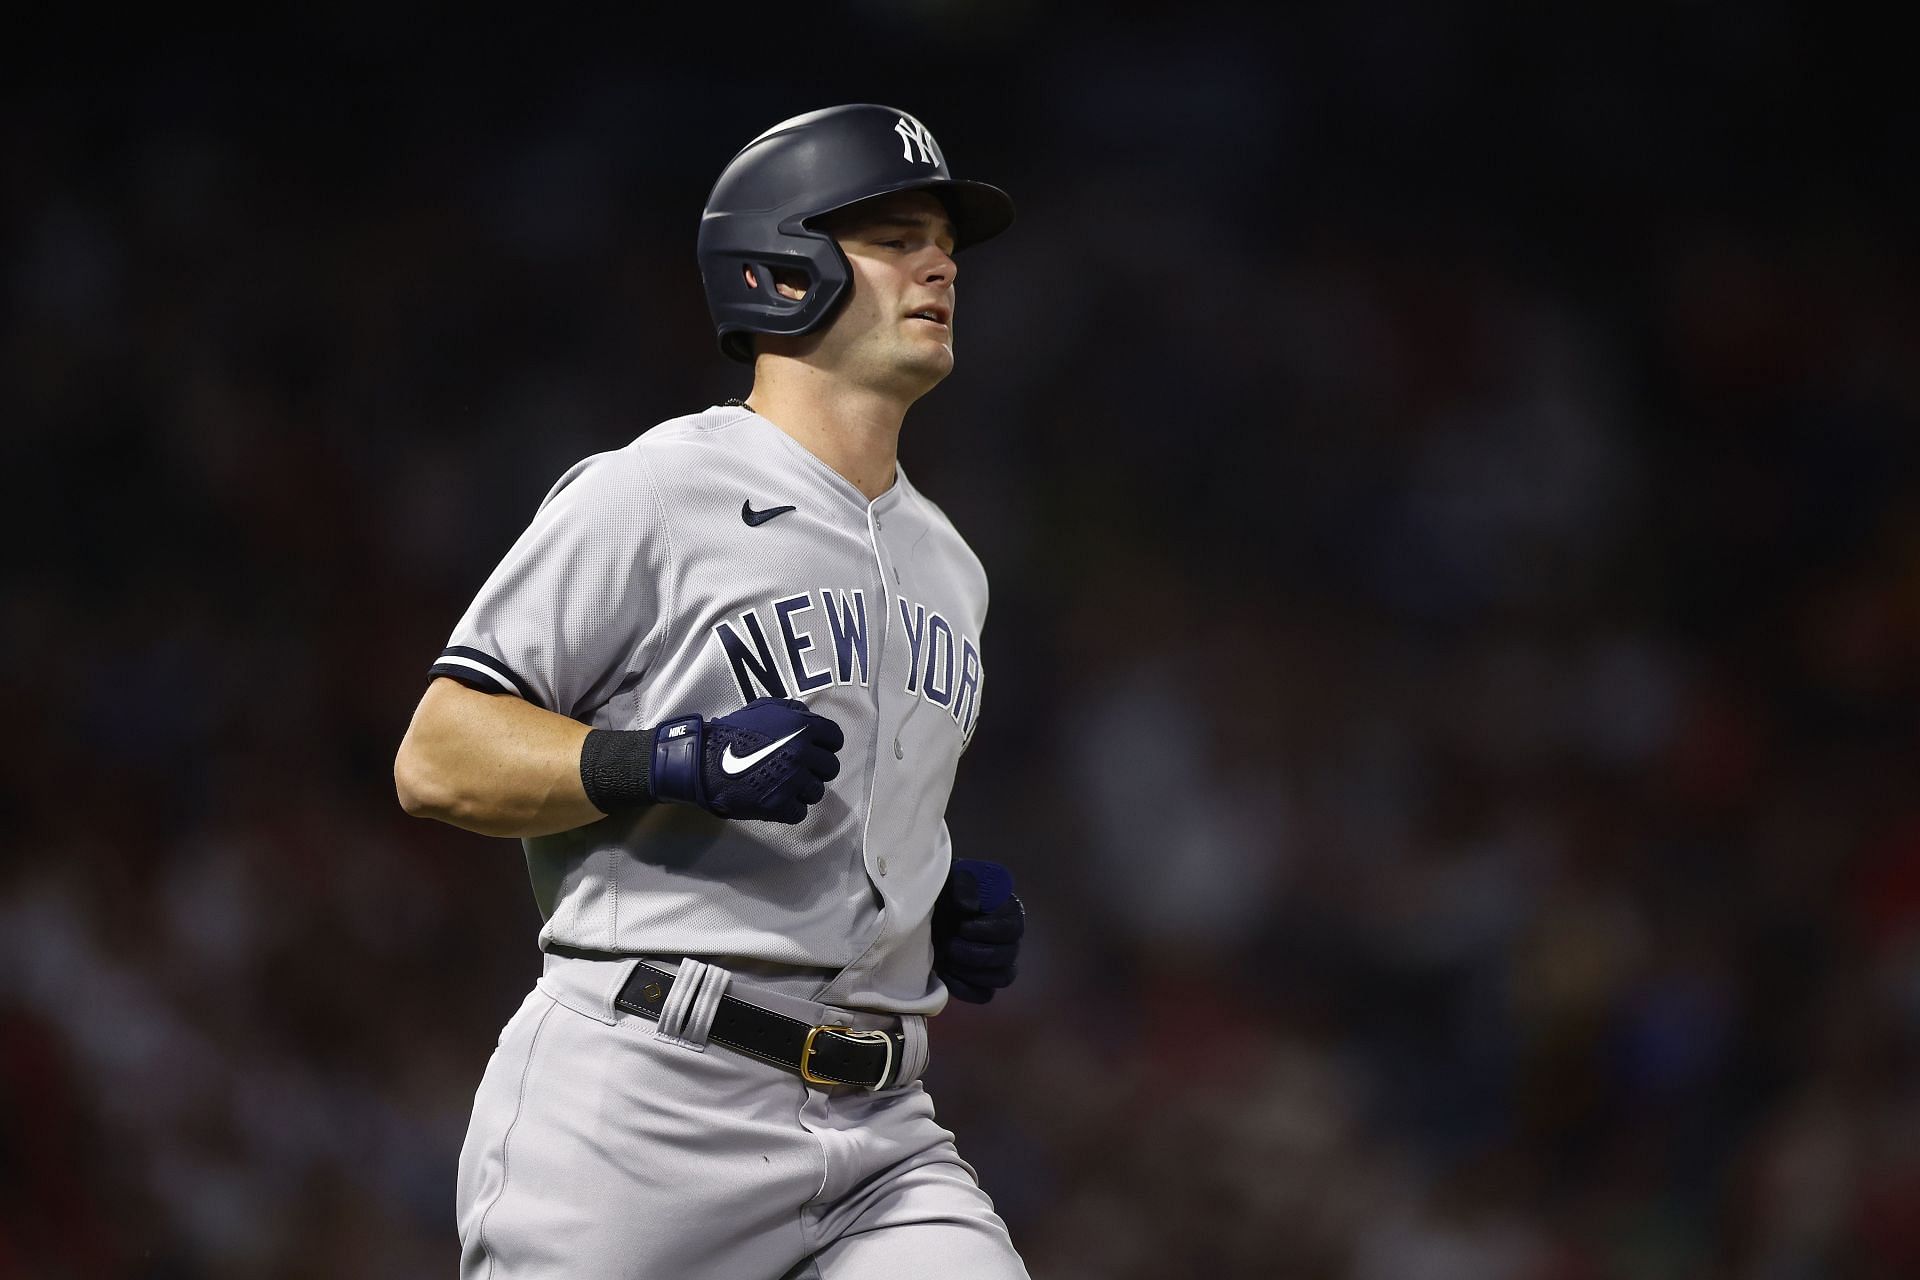 Benintendi disappointed by slow start to Yankees career